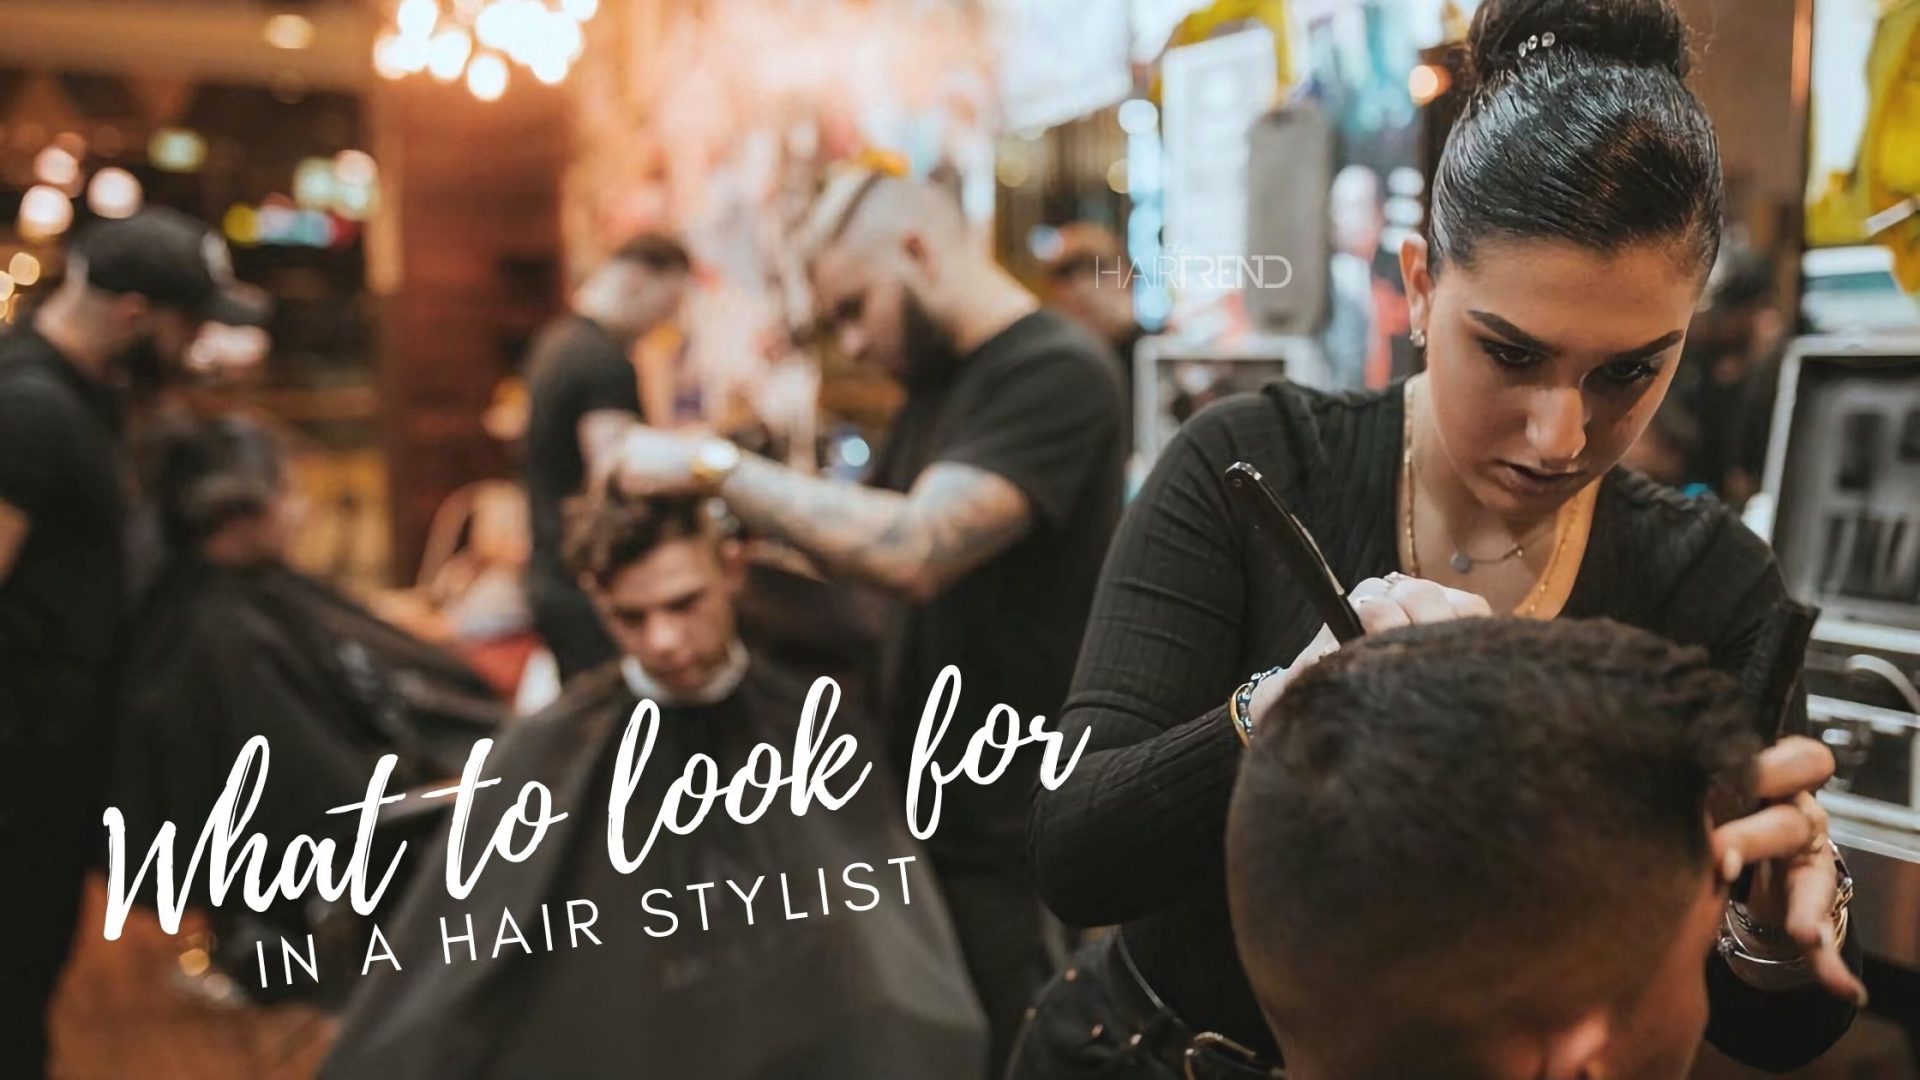 8 Quick Tips for Finding a New Hair Stylist and Make Your Hair Wow